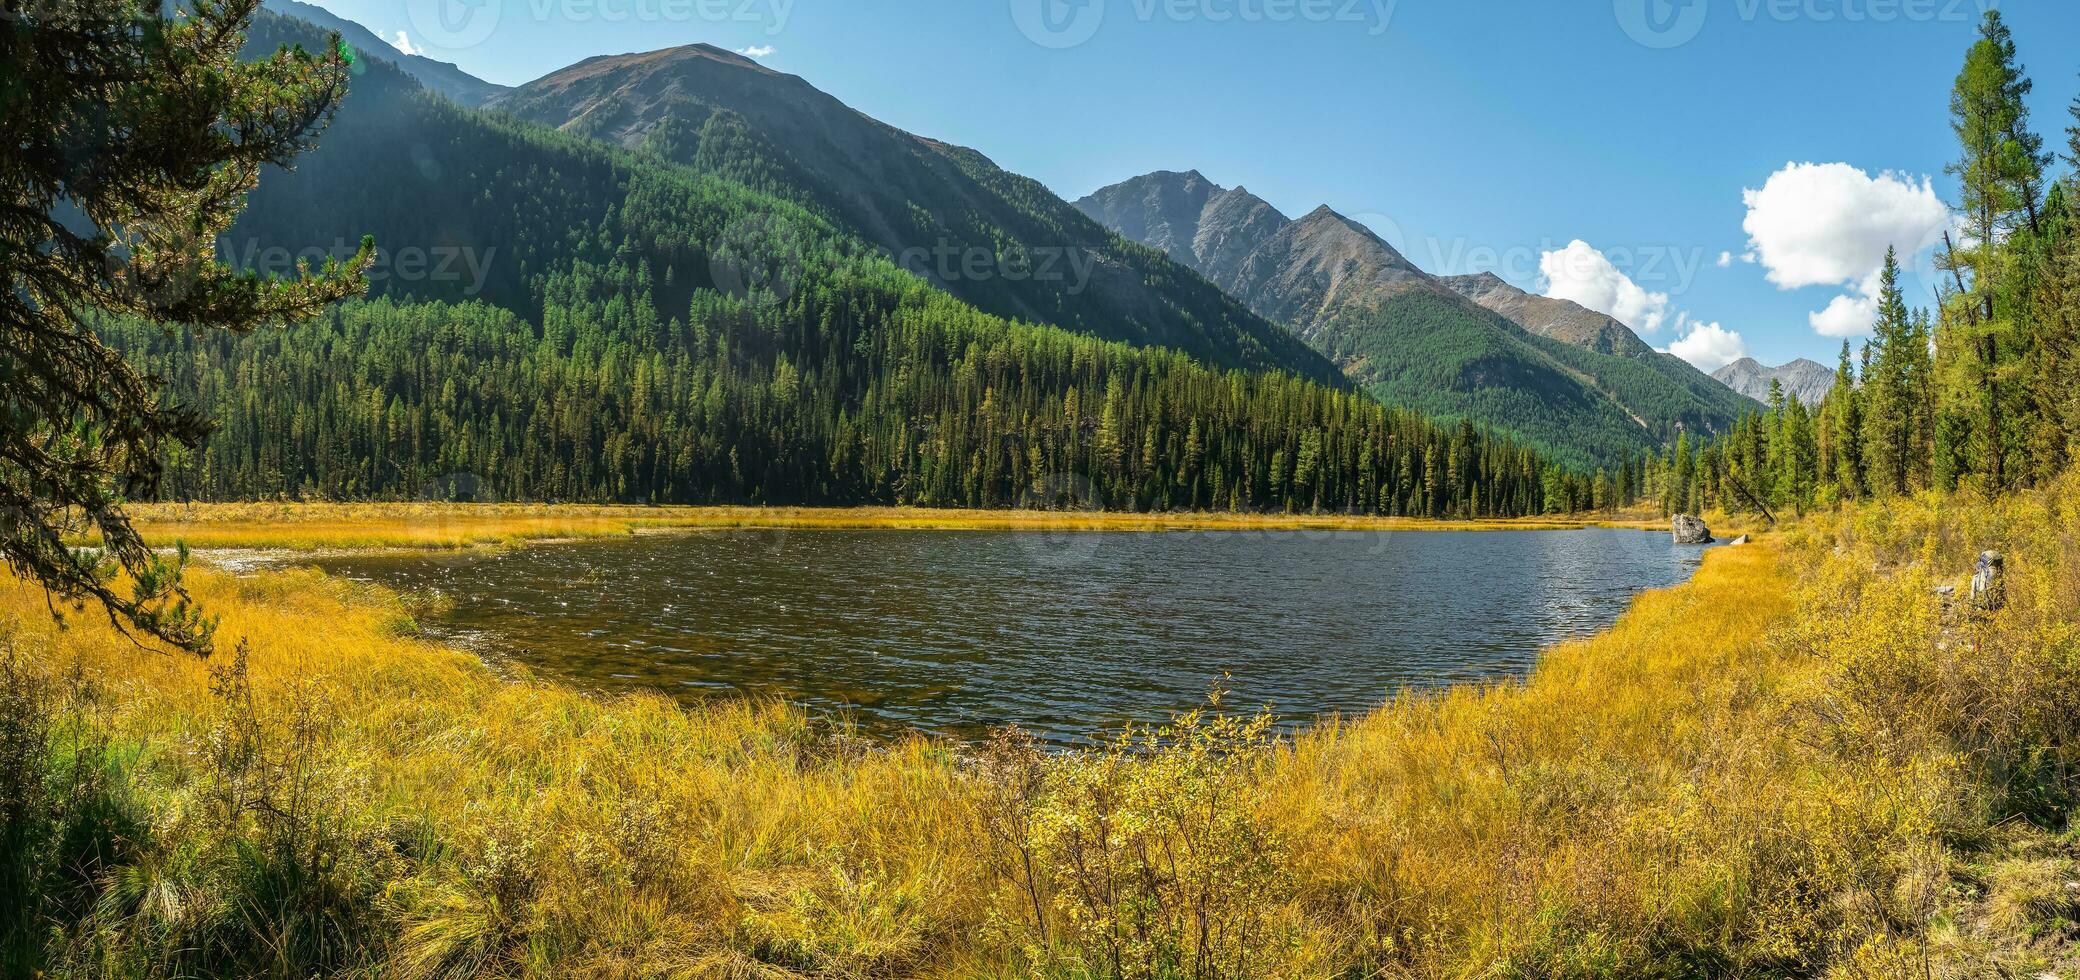 Panoramic view of sunny swampy autumn plateau. Awesome highland scenery with beautiful glacial lake among sunlit hills and rocks against mountain range. photo